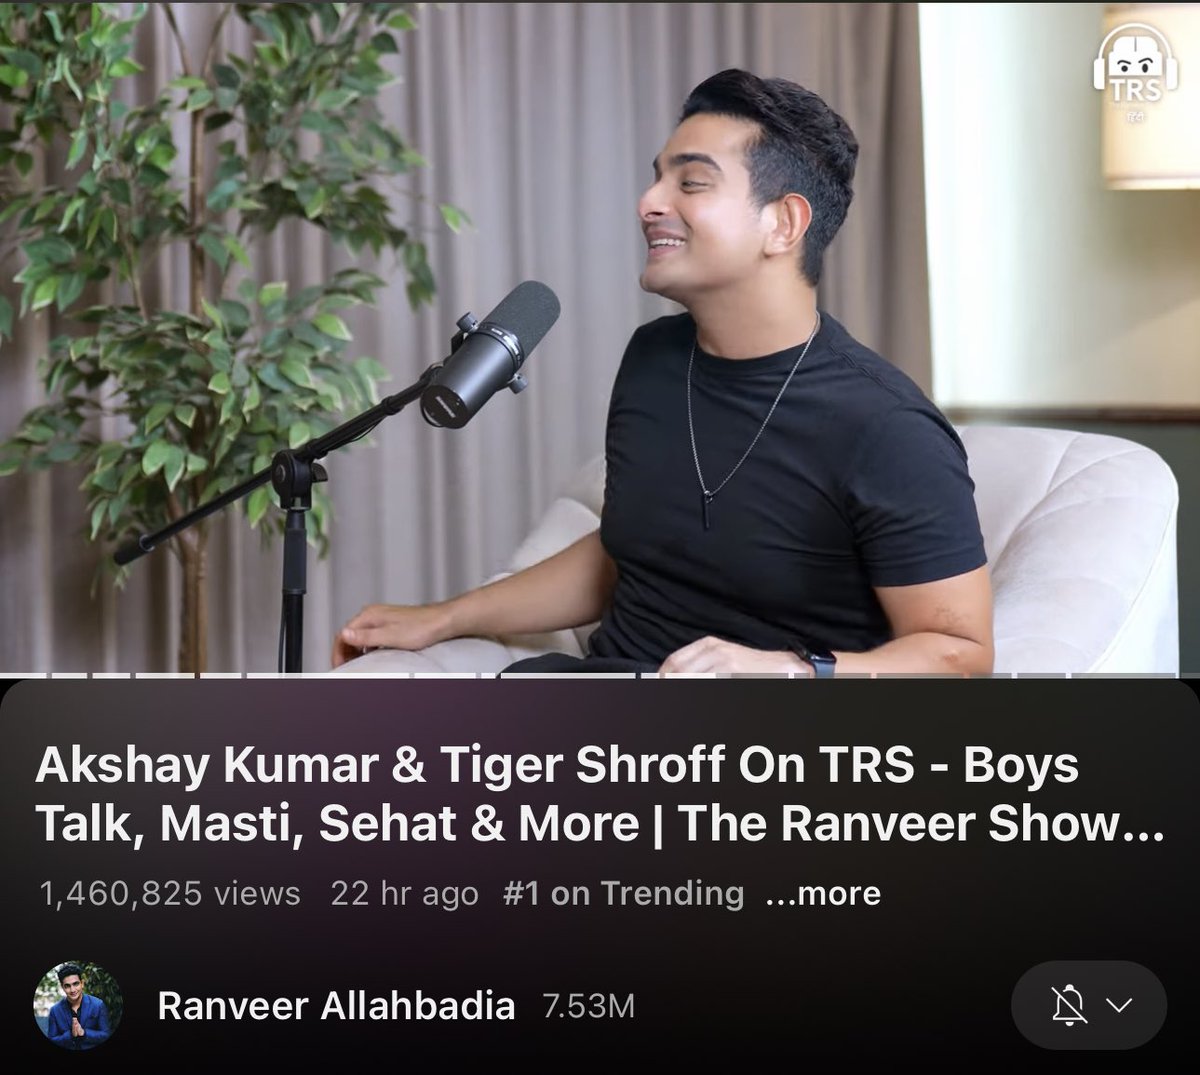 Our latest podcast hit the number 1 spot on the YouTube India trending list. To simply be on the list was a dream not too long ago. Life is fulfilling, especially when team work is at its core. Took 9 years to get here! Totally worth it. 🏹